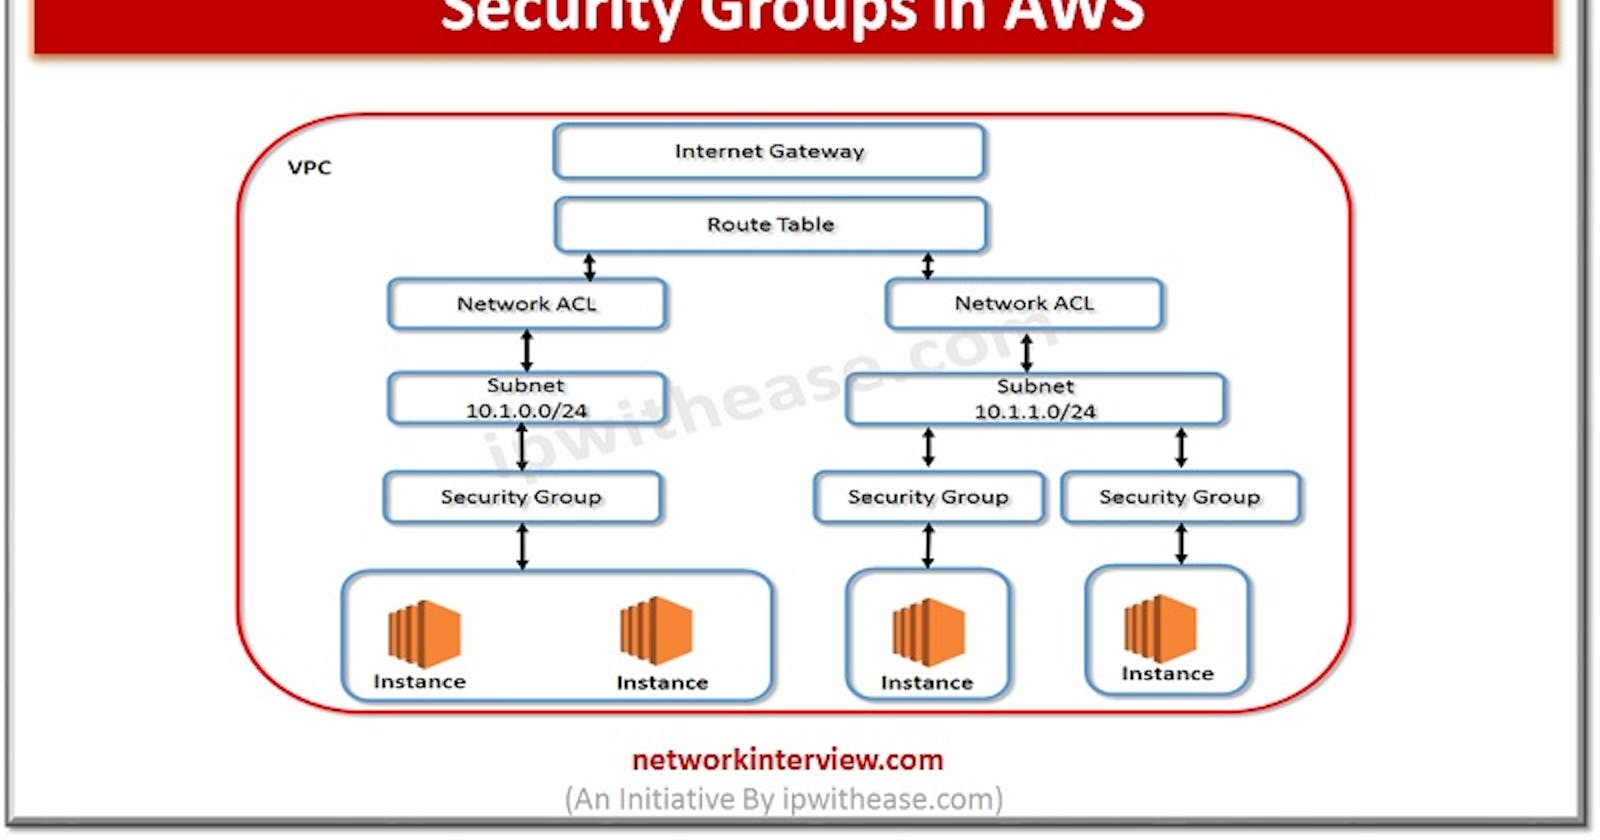 Why security groups in AWS are called stateful?